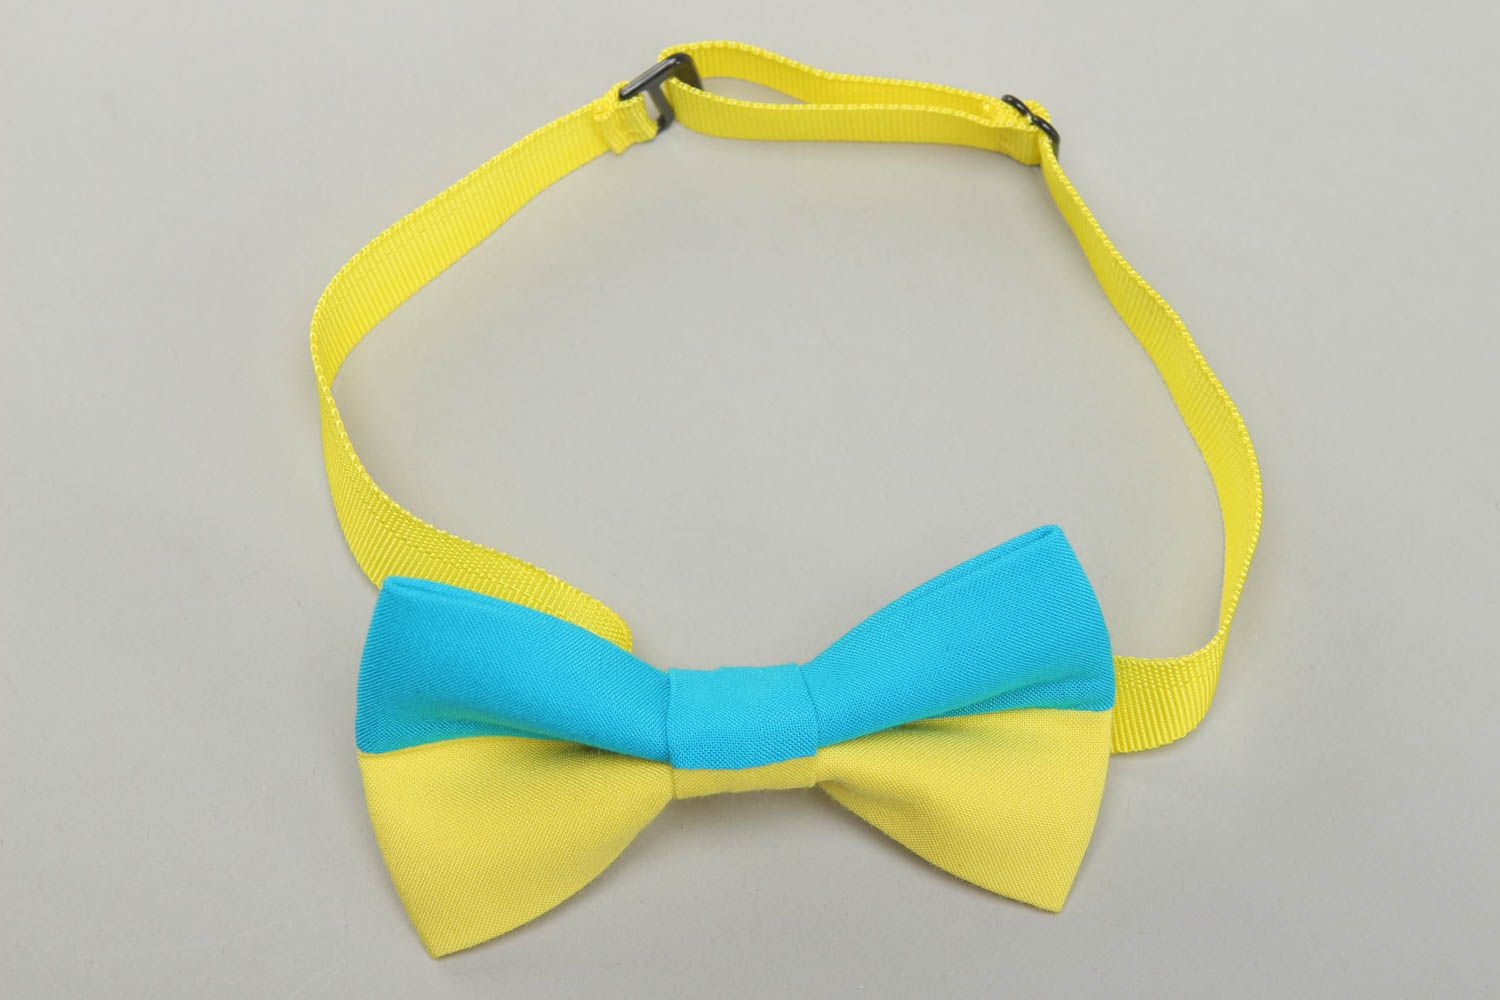 Fabric bow tie of yellow and blue colors photo 1